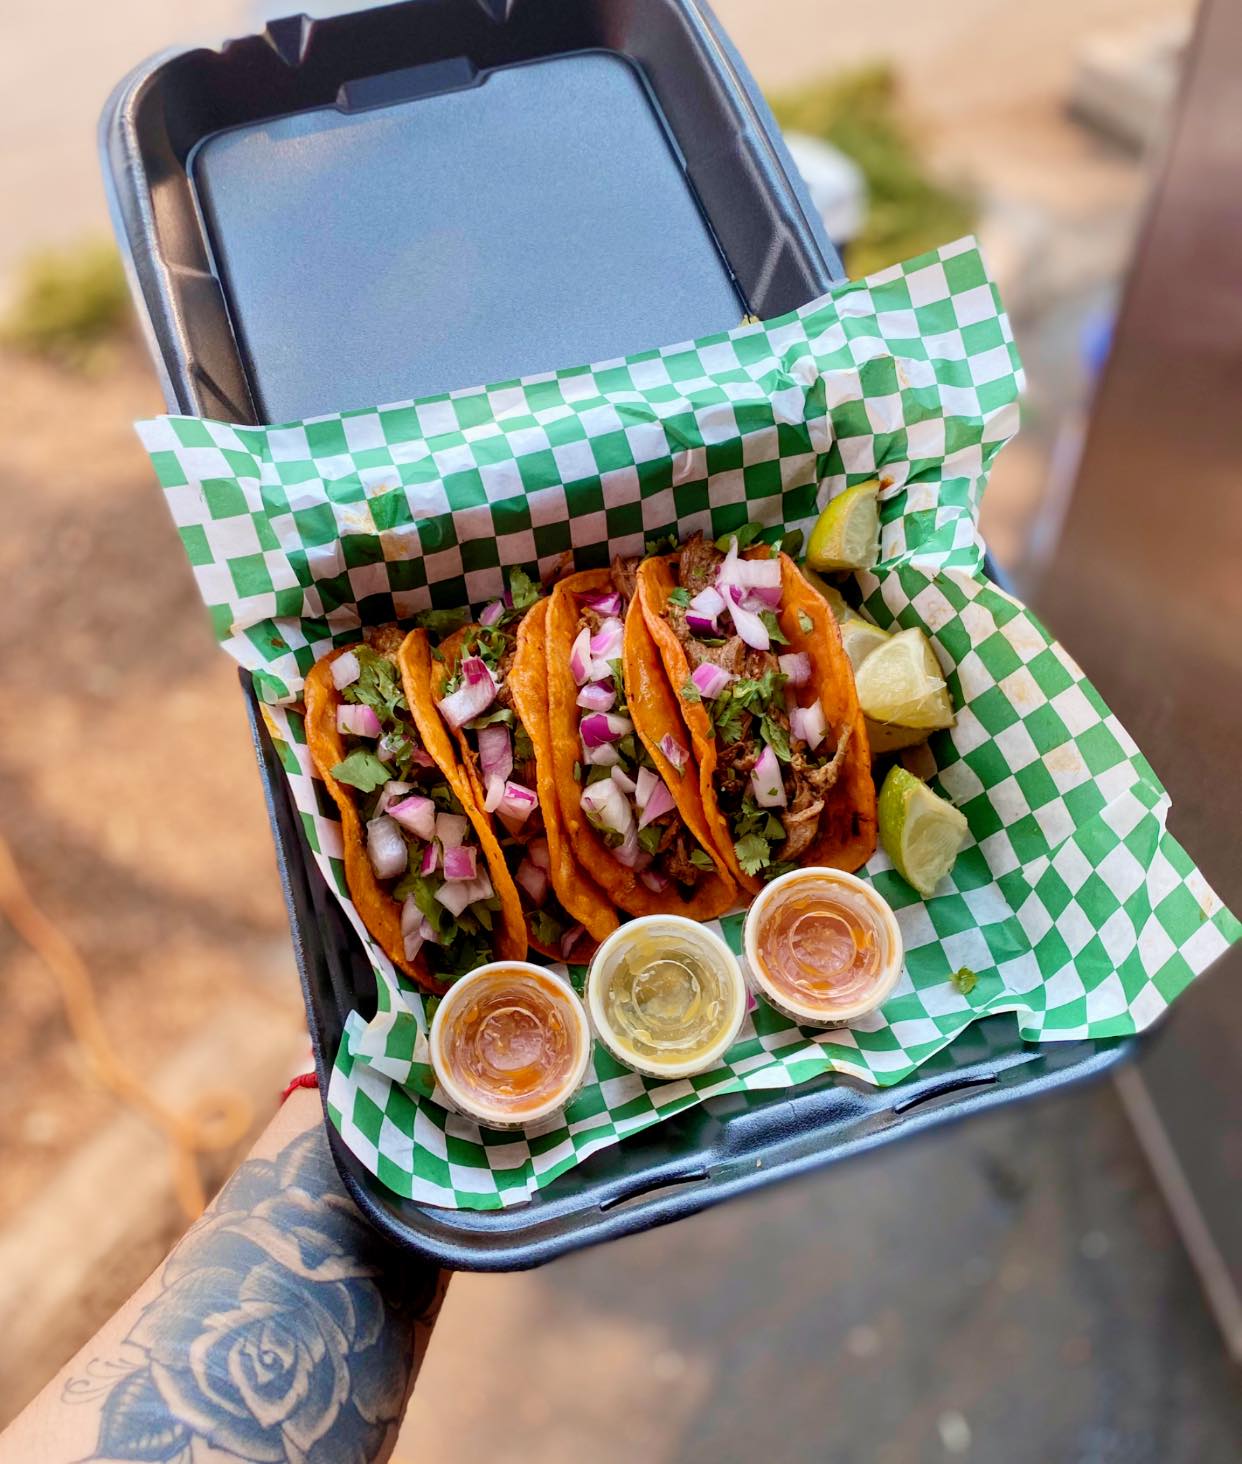 7 Food Trucks and Restaurants In and Around Denver That Offer Birria Tacos  And More - 303 Magazine